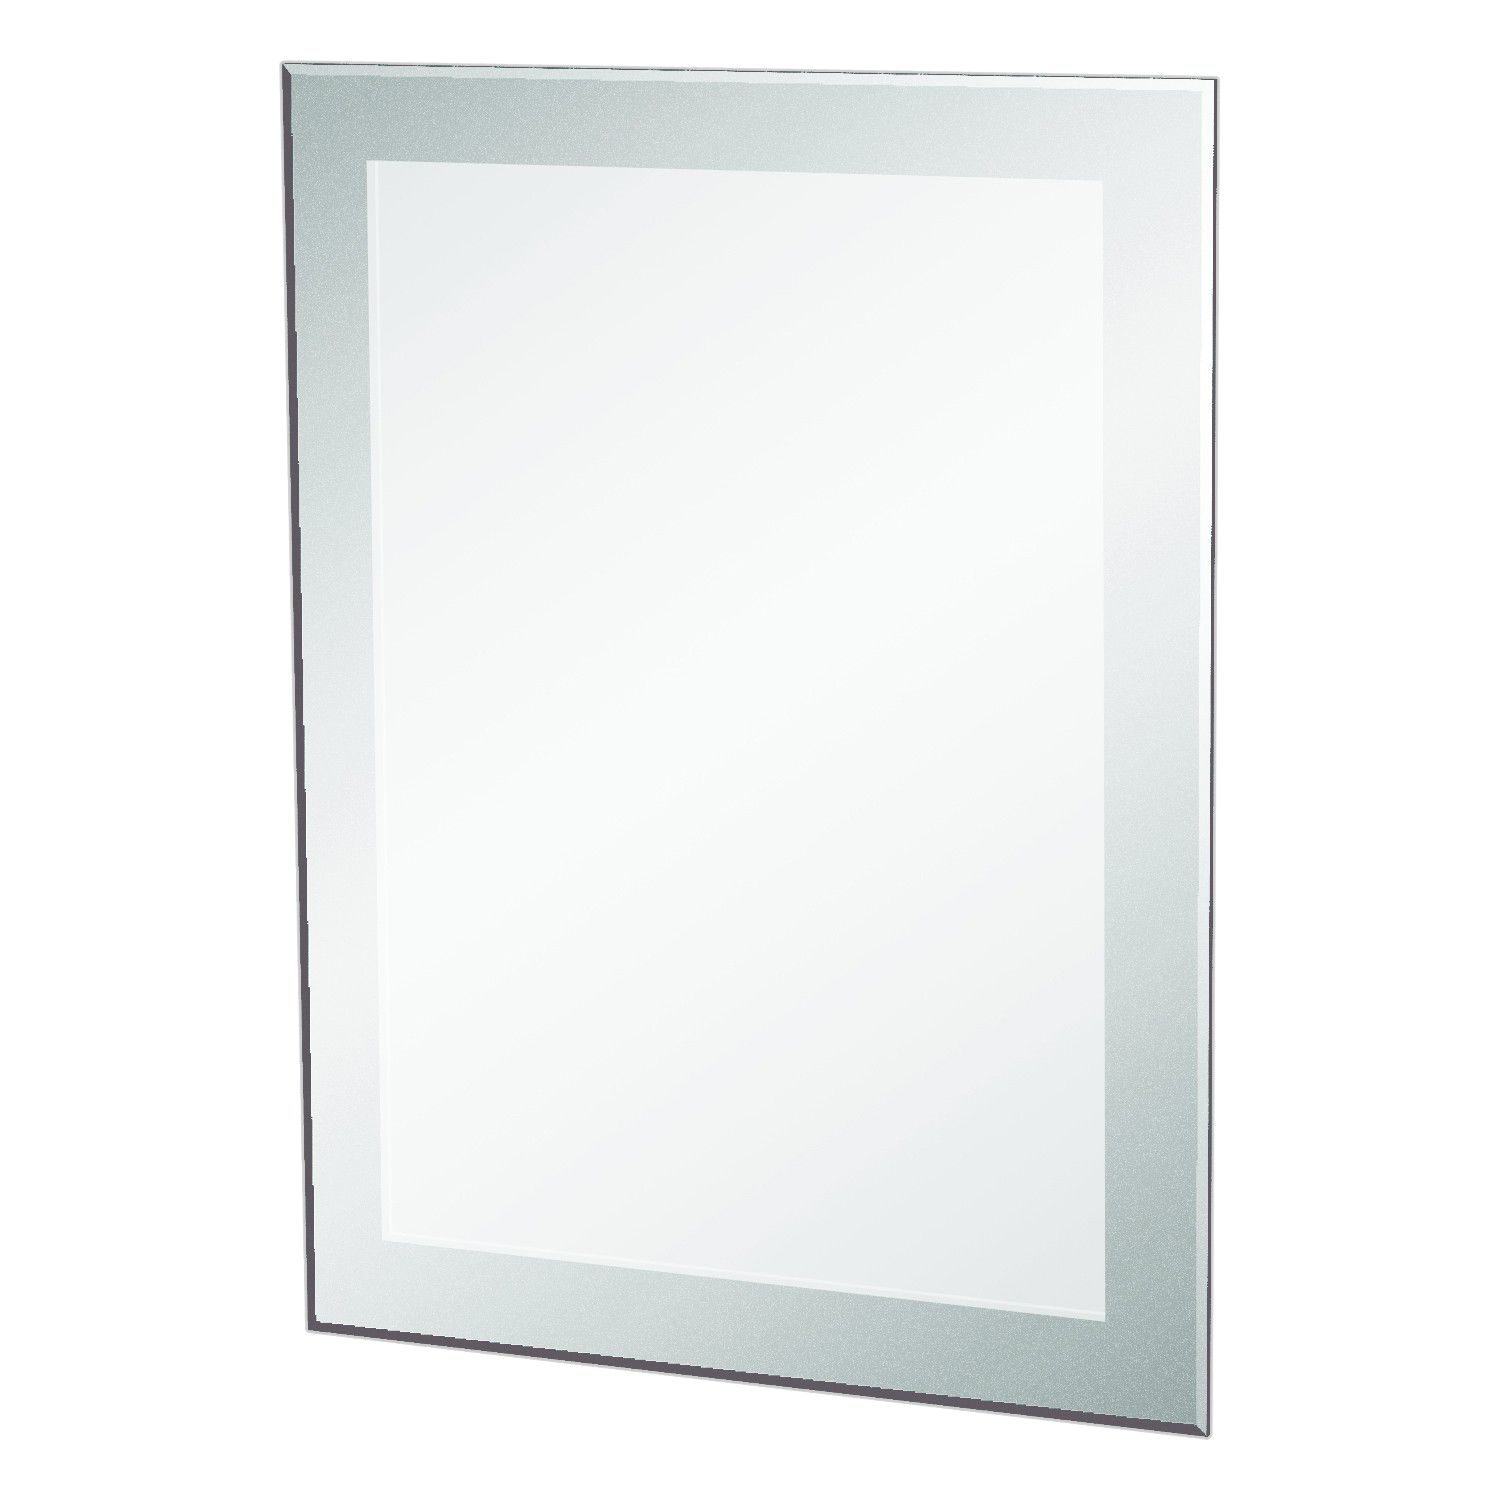 Frosted Edge Mirror, 70 x 50cm